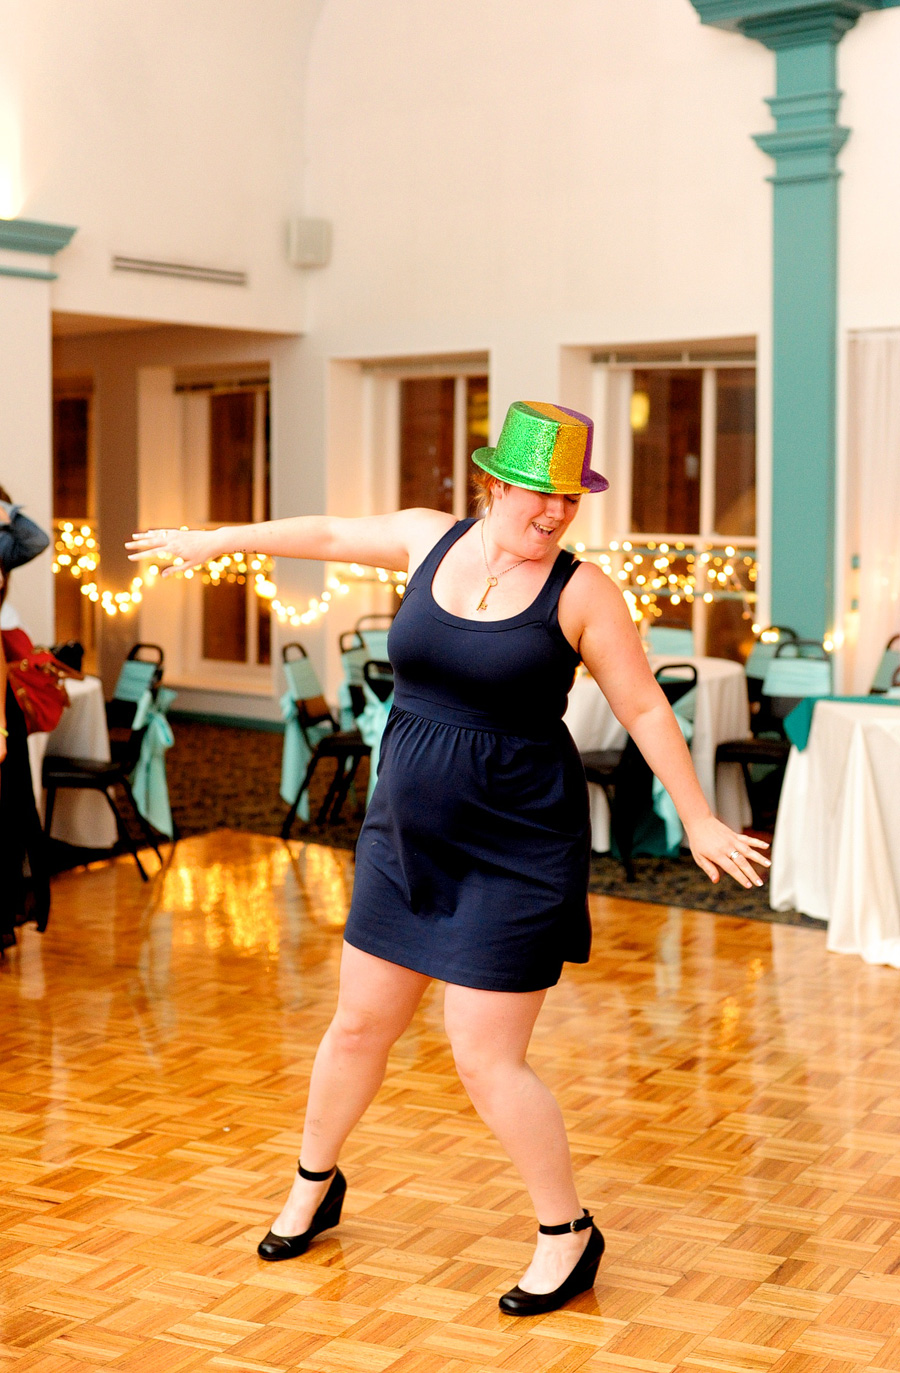 When the brides ask you to dance, you DANCE... and Tina was more than happy to oblige at Deb & Lisa's wedding!